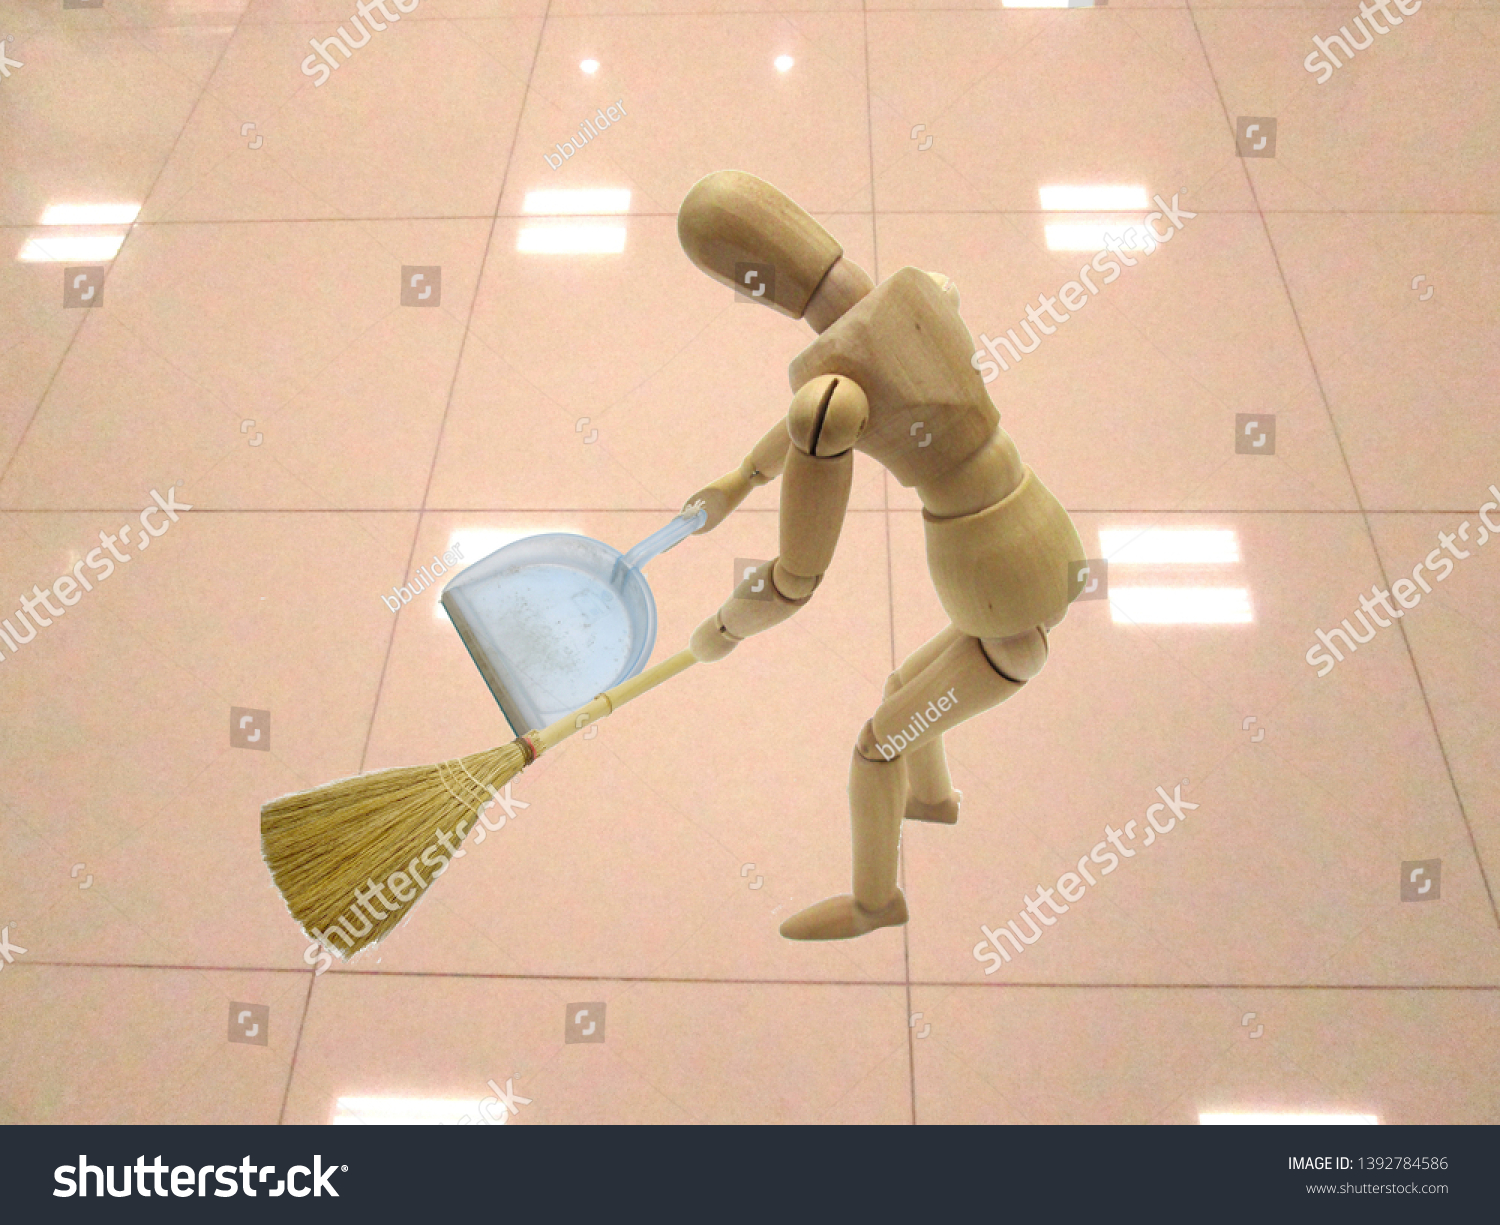 
Image to clean the floor clean #1392784586